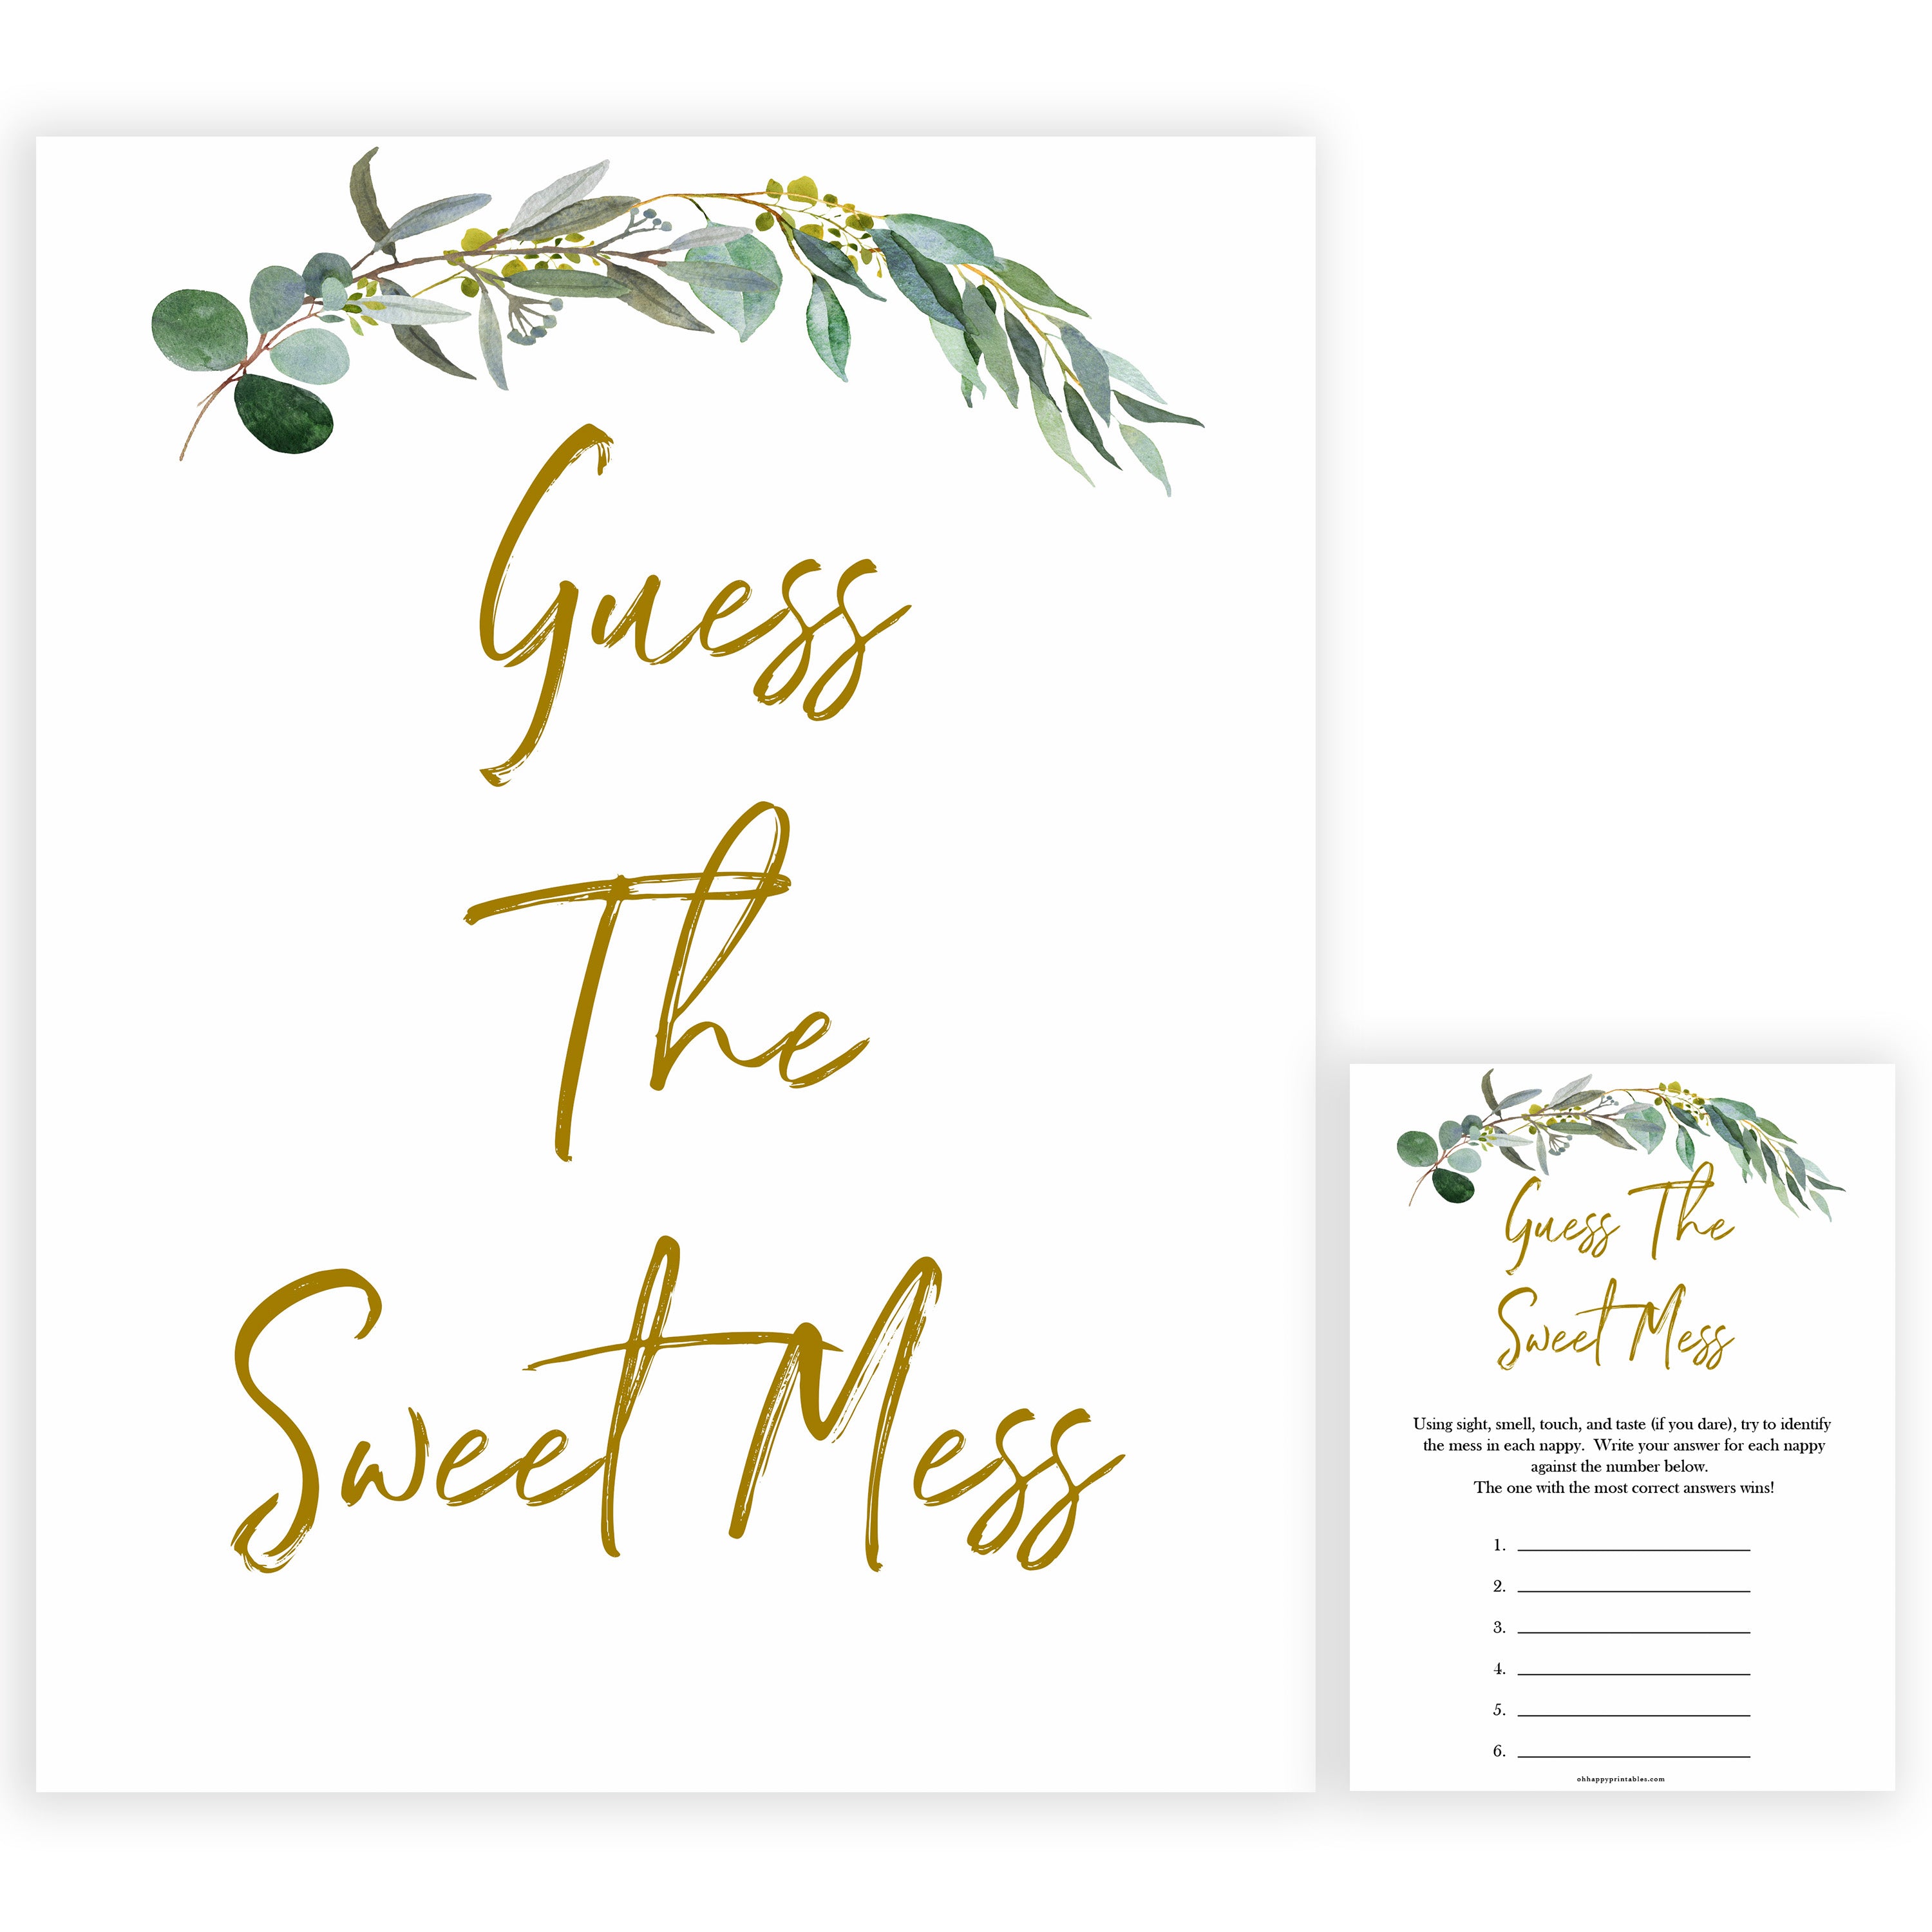 Eucalyptus baby shower games, Guess The Sweet Mess baby game, fun baby shower games, printable baby games, baby shower ideas, baby games, baby shower baby shower bundle, baby shower games packs, botanical baby shower	